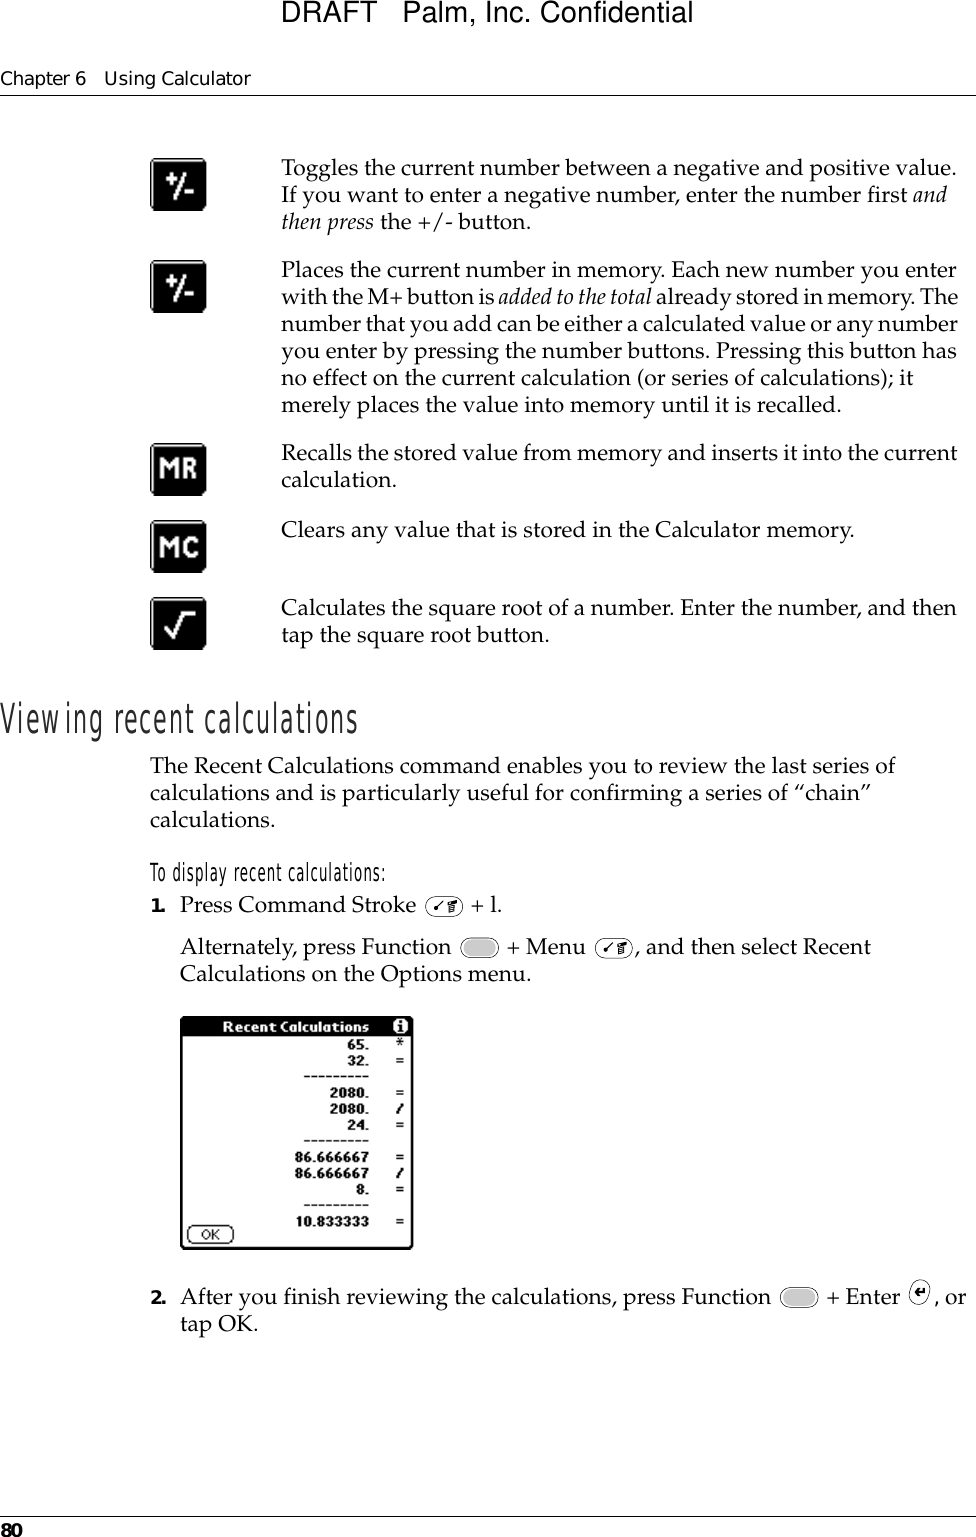 Chapter 6 Using Calculator80Viewing recent calculationsThe Recent Calculations command enables you to review the last series of calculations and is particularly useful for confirming a series of “chain” calculations.To display recent calculations:1. Press Command Stroke   + l.Alternately, press Function   + Menu  , and then select Recent Calculations on the Options menu.2. After you finish reviewing the calculations, press Function   + Enter  , or tap OK.Toggles the current number between a negative and positive value. If you want to enter a negative number, enter the number first and then press the +/- button.Places the current number in memory. Each new number you enter with the M+ button is added to the total already stored in memory. The number that you add can be either a calculated value or any number you enter by pressing the number buttons. Pressing this button has no effect on the current calculation (or series of calculations); it merely places the value into memory until it is recalled.Recalls the stored value from memory and inserts it into the current calculation.Clears any value that is stored in the Calculator memory.Calculates the square root of a number. Enter the number, and then tap the square root button.DRAFT   Palm, Inc. Confidential